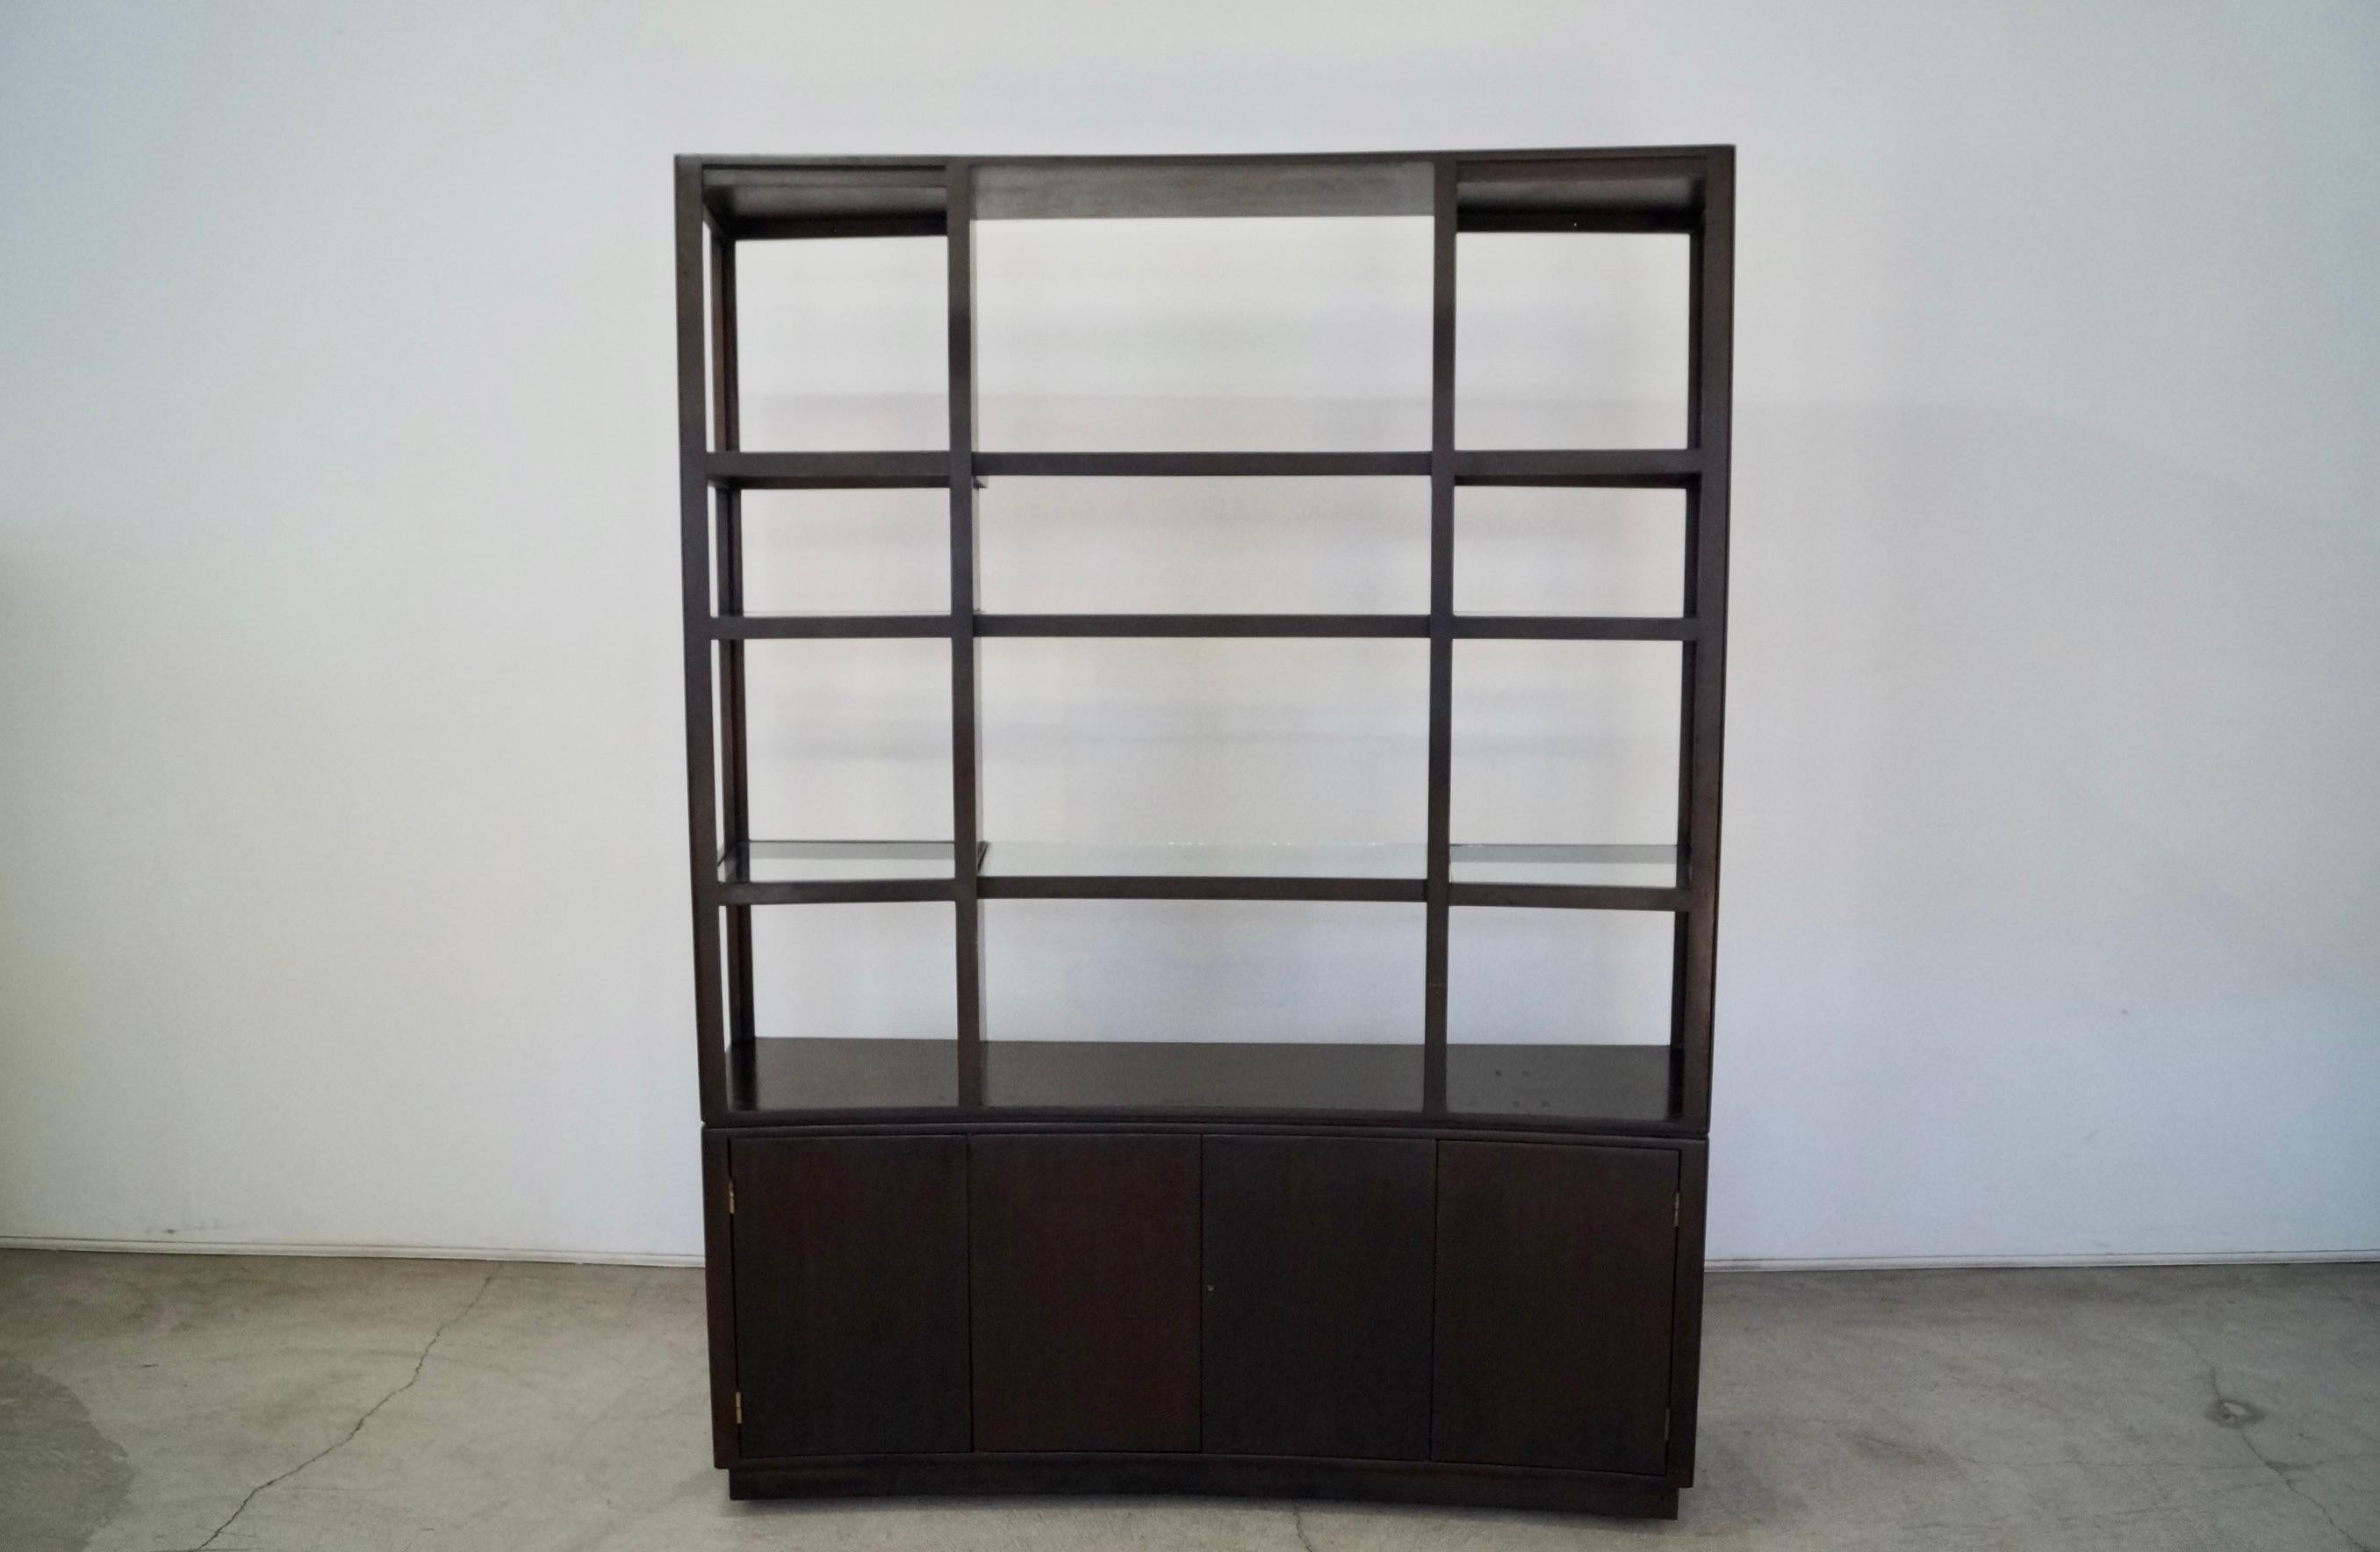 Vintage Mid-century Modern shelf for sale. It was manufactured in the 1970's by Dunbar, and designed by Edward Wormley. It has a lower credenza with cabinets and a drawer and shelves. It has a hutch that sits on top of the credenza with glass